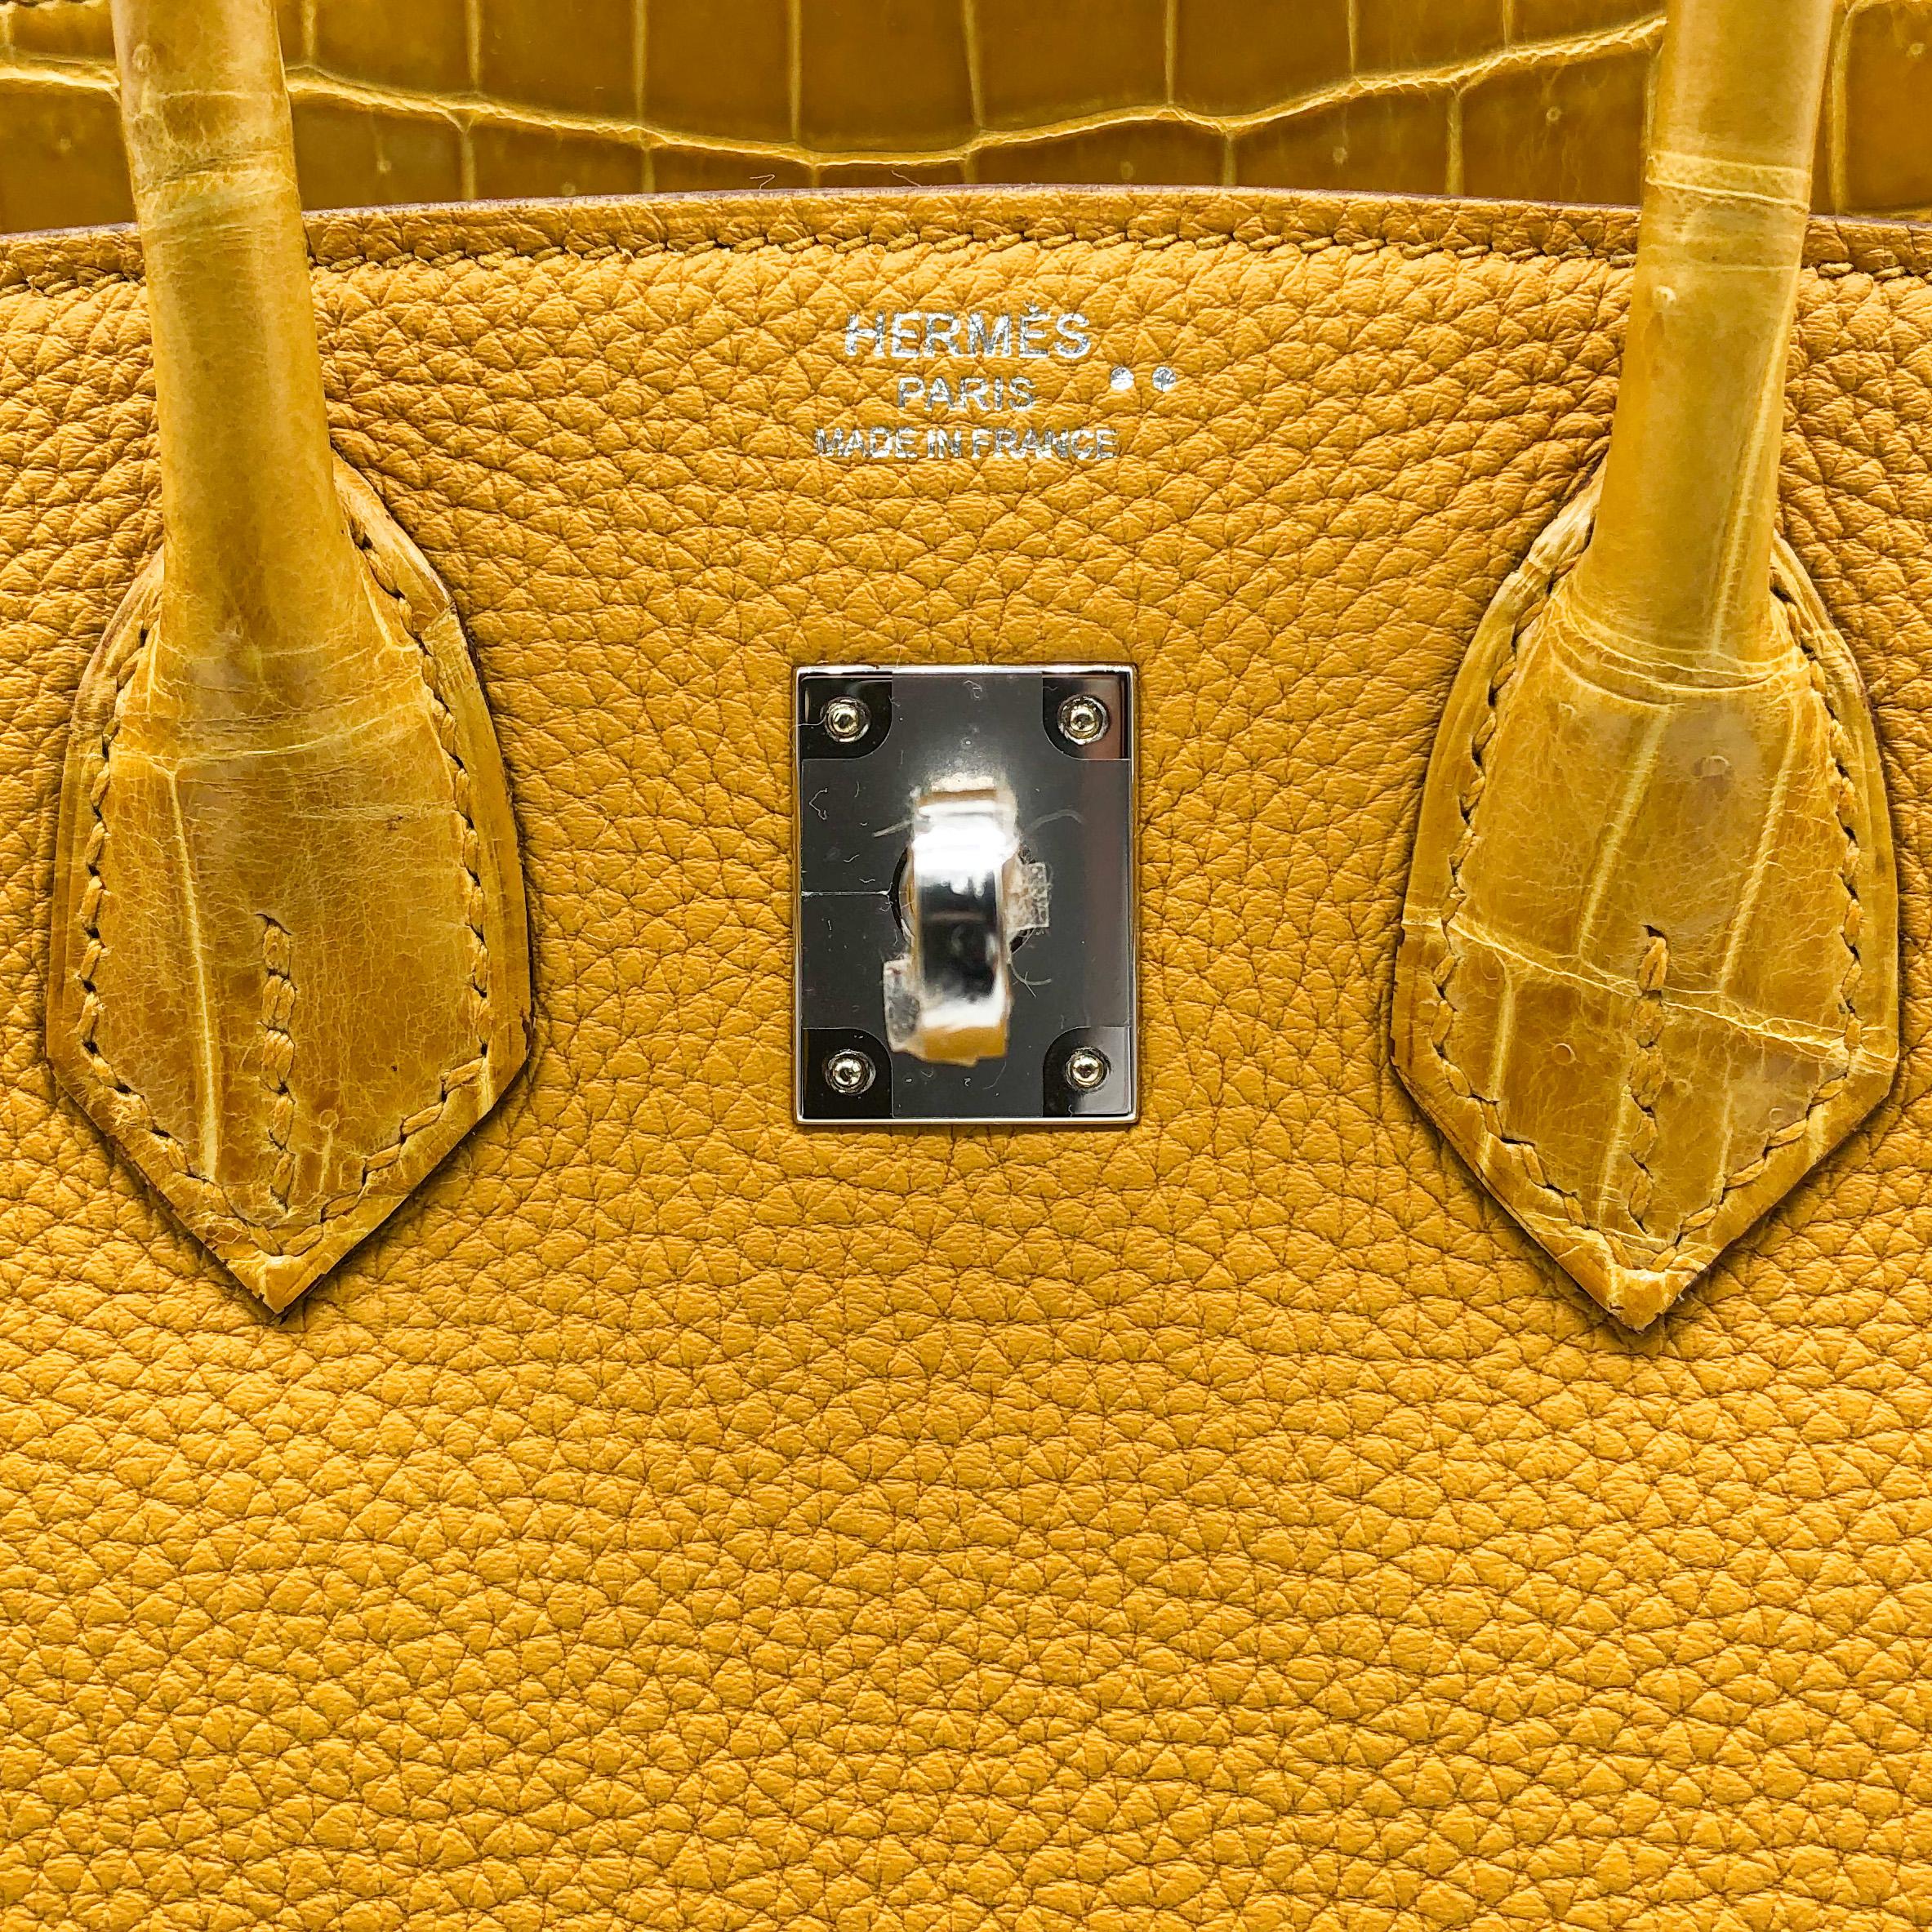 Brand: Hermès 
Style: Birkin Sellier
Size: 25cm
Color: Jaune Ambre
Leather: Shiny Niloticus Crocodile and Veau Togo
Hardware: Palladium

Condition: Pristine, never carried: The item has never been carried and is in pristine condition complete with